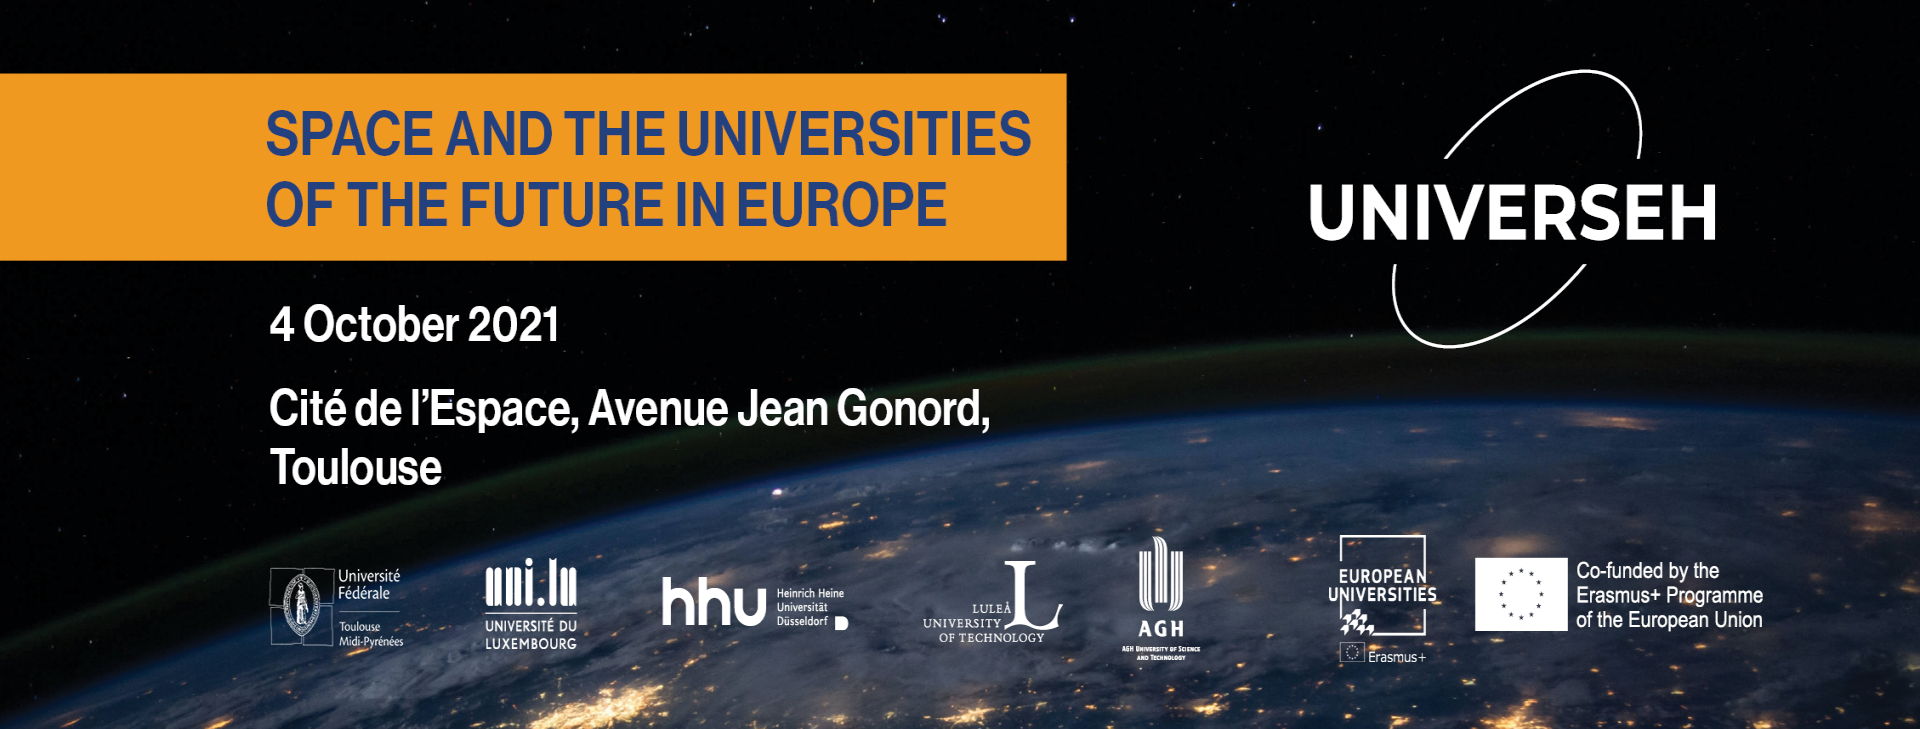 ESA joins the Universeh inaugural conference to address the Future of Work in the space sector